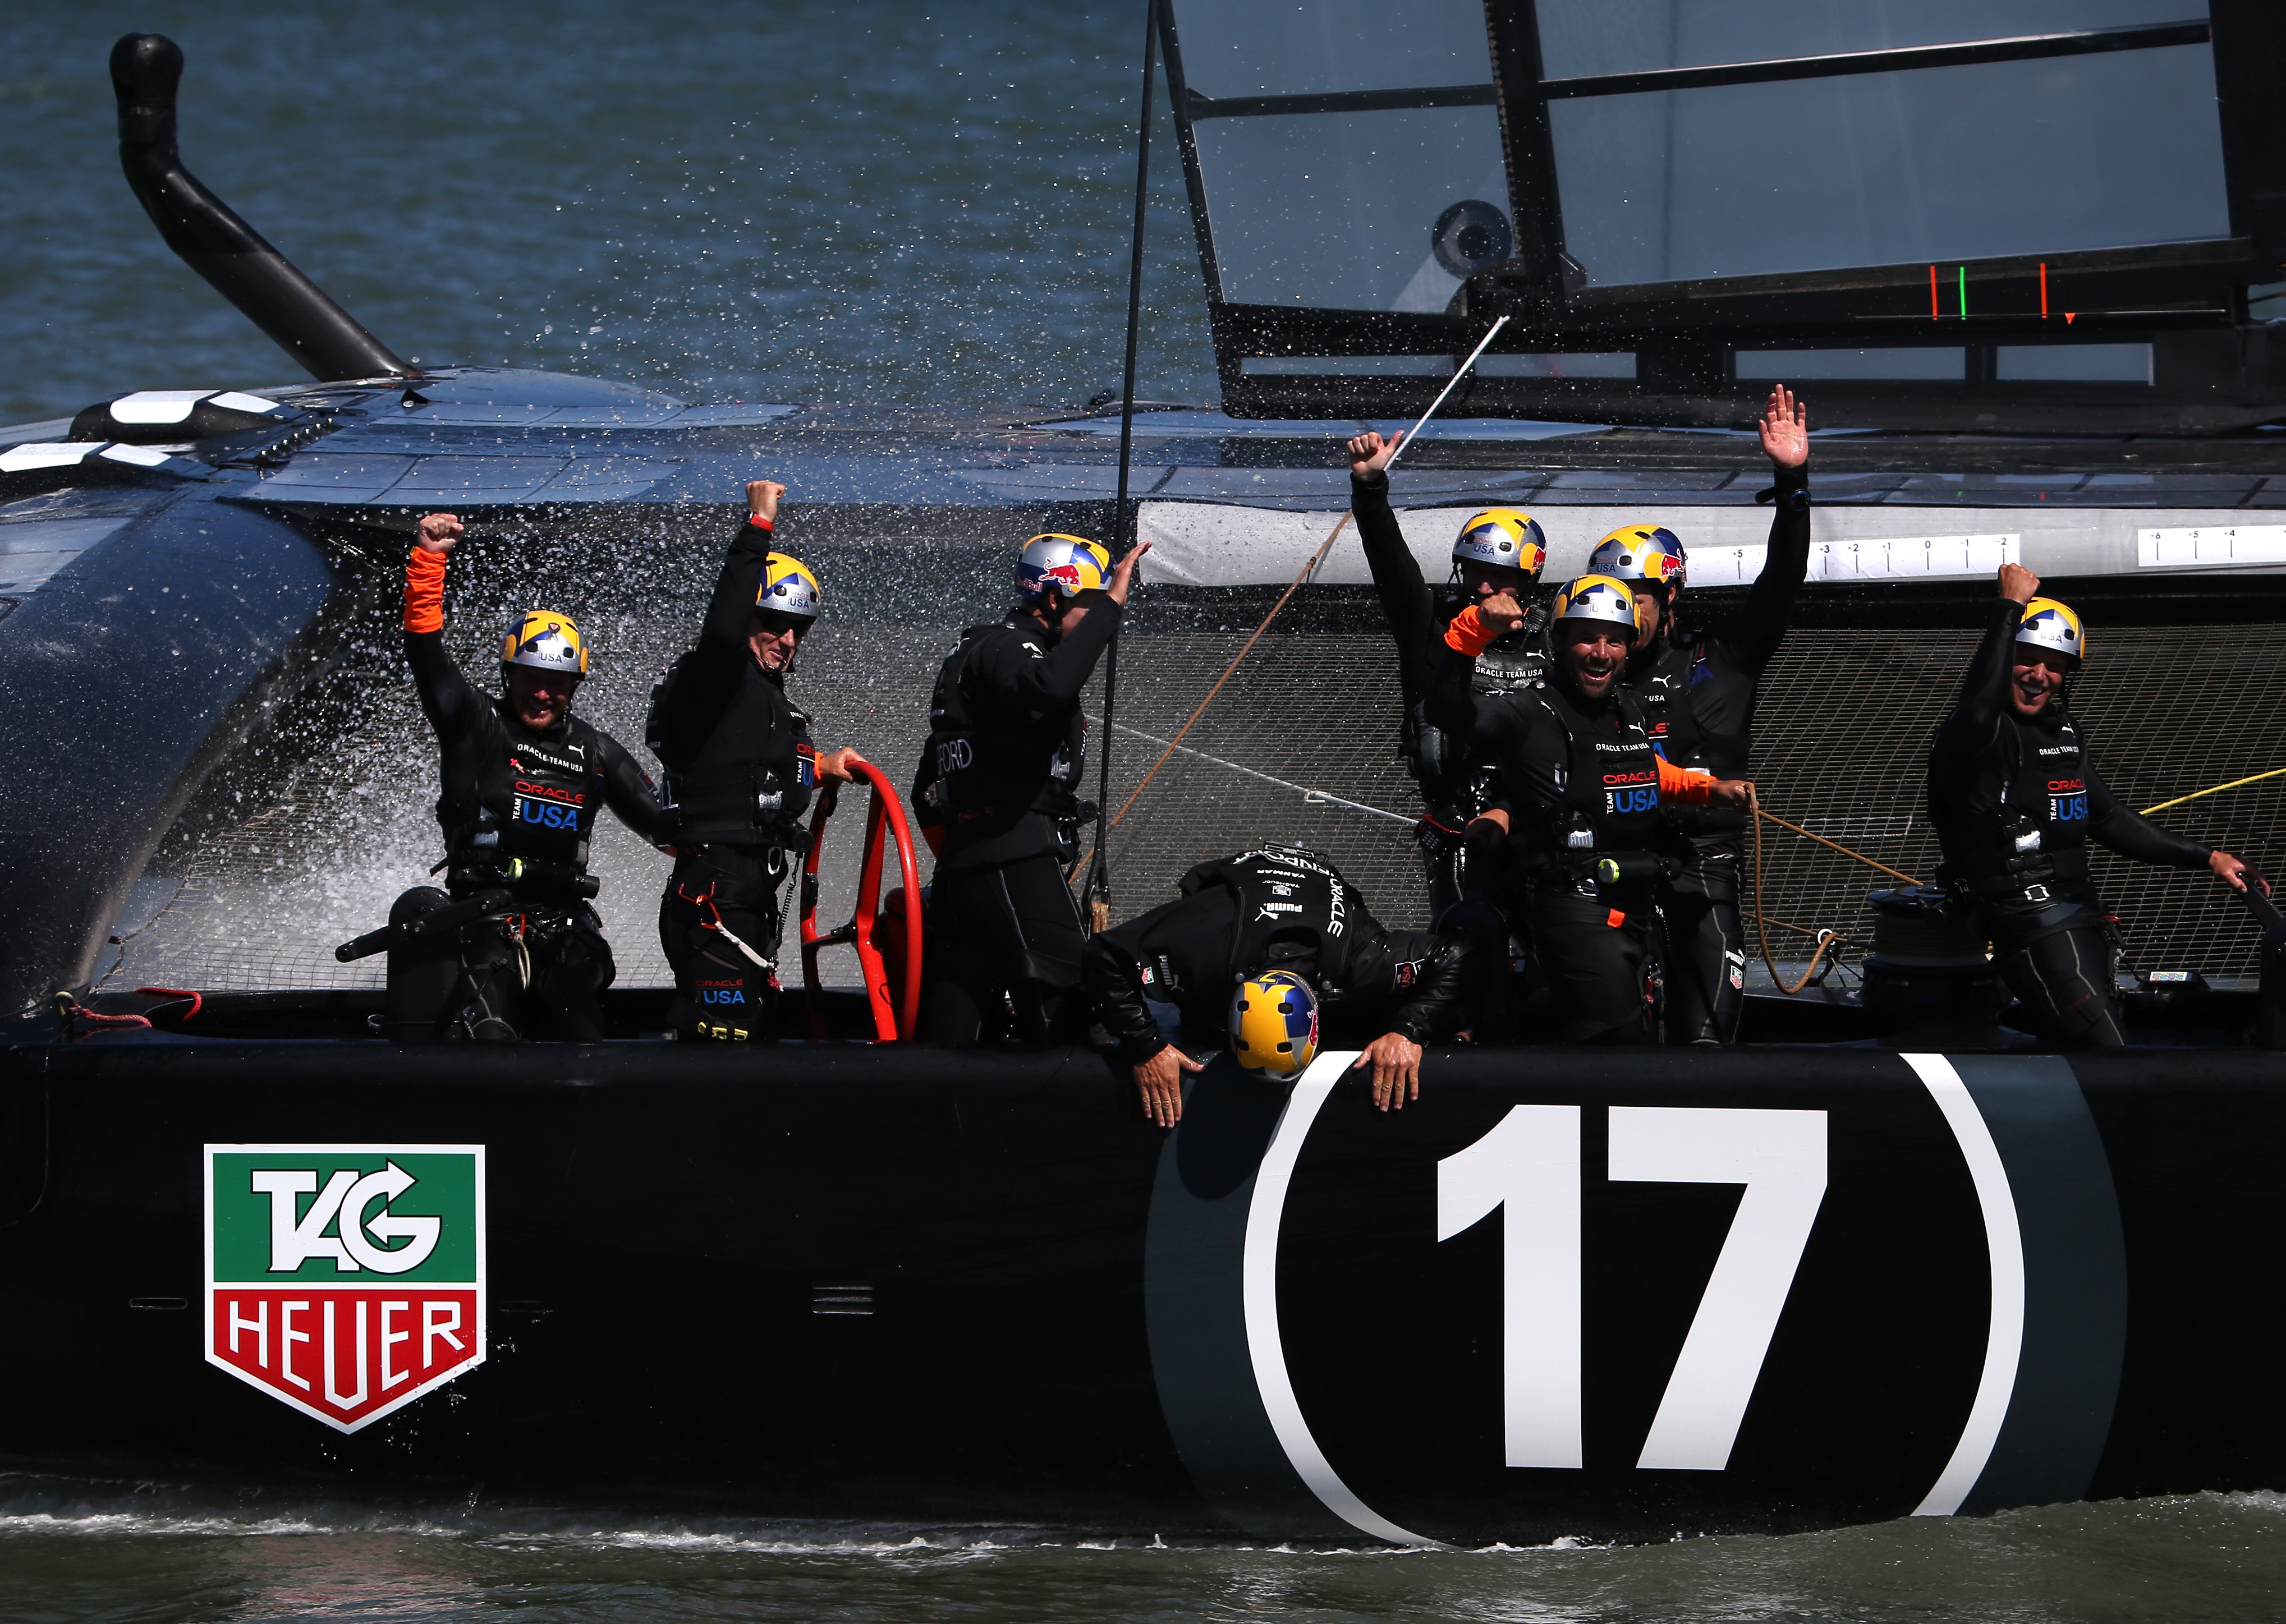 Oracle Team USA skippered by James Spithill celebrates after defending the cup as they beat Emirates Team New Zealand to defend the America's Cup during the final race on September 25, 2013 in San Francisco, California. (credit: Justin Sullivan/Getty Images)